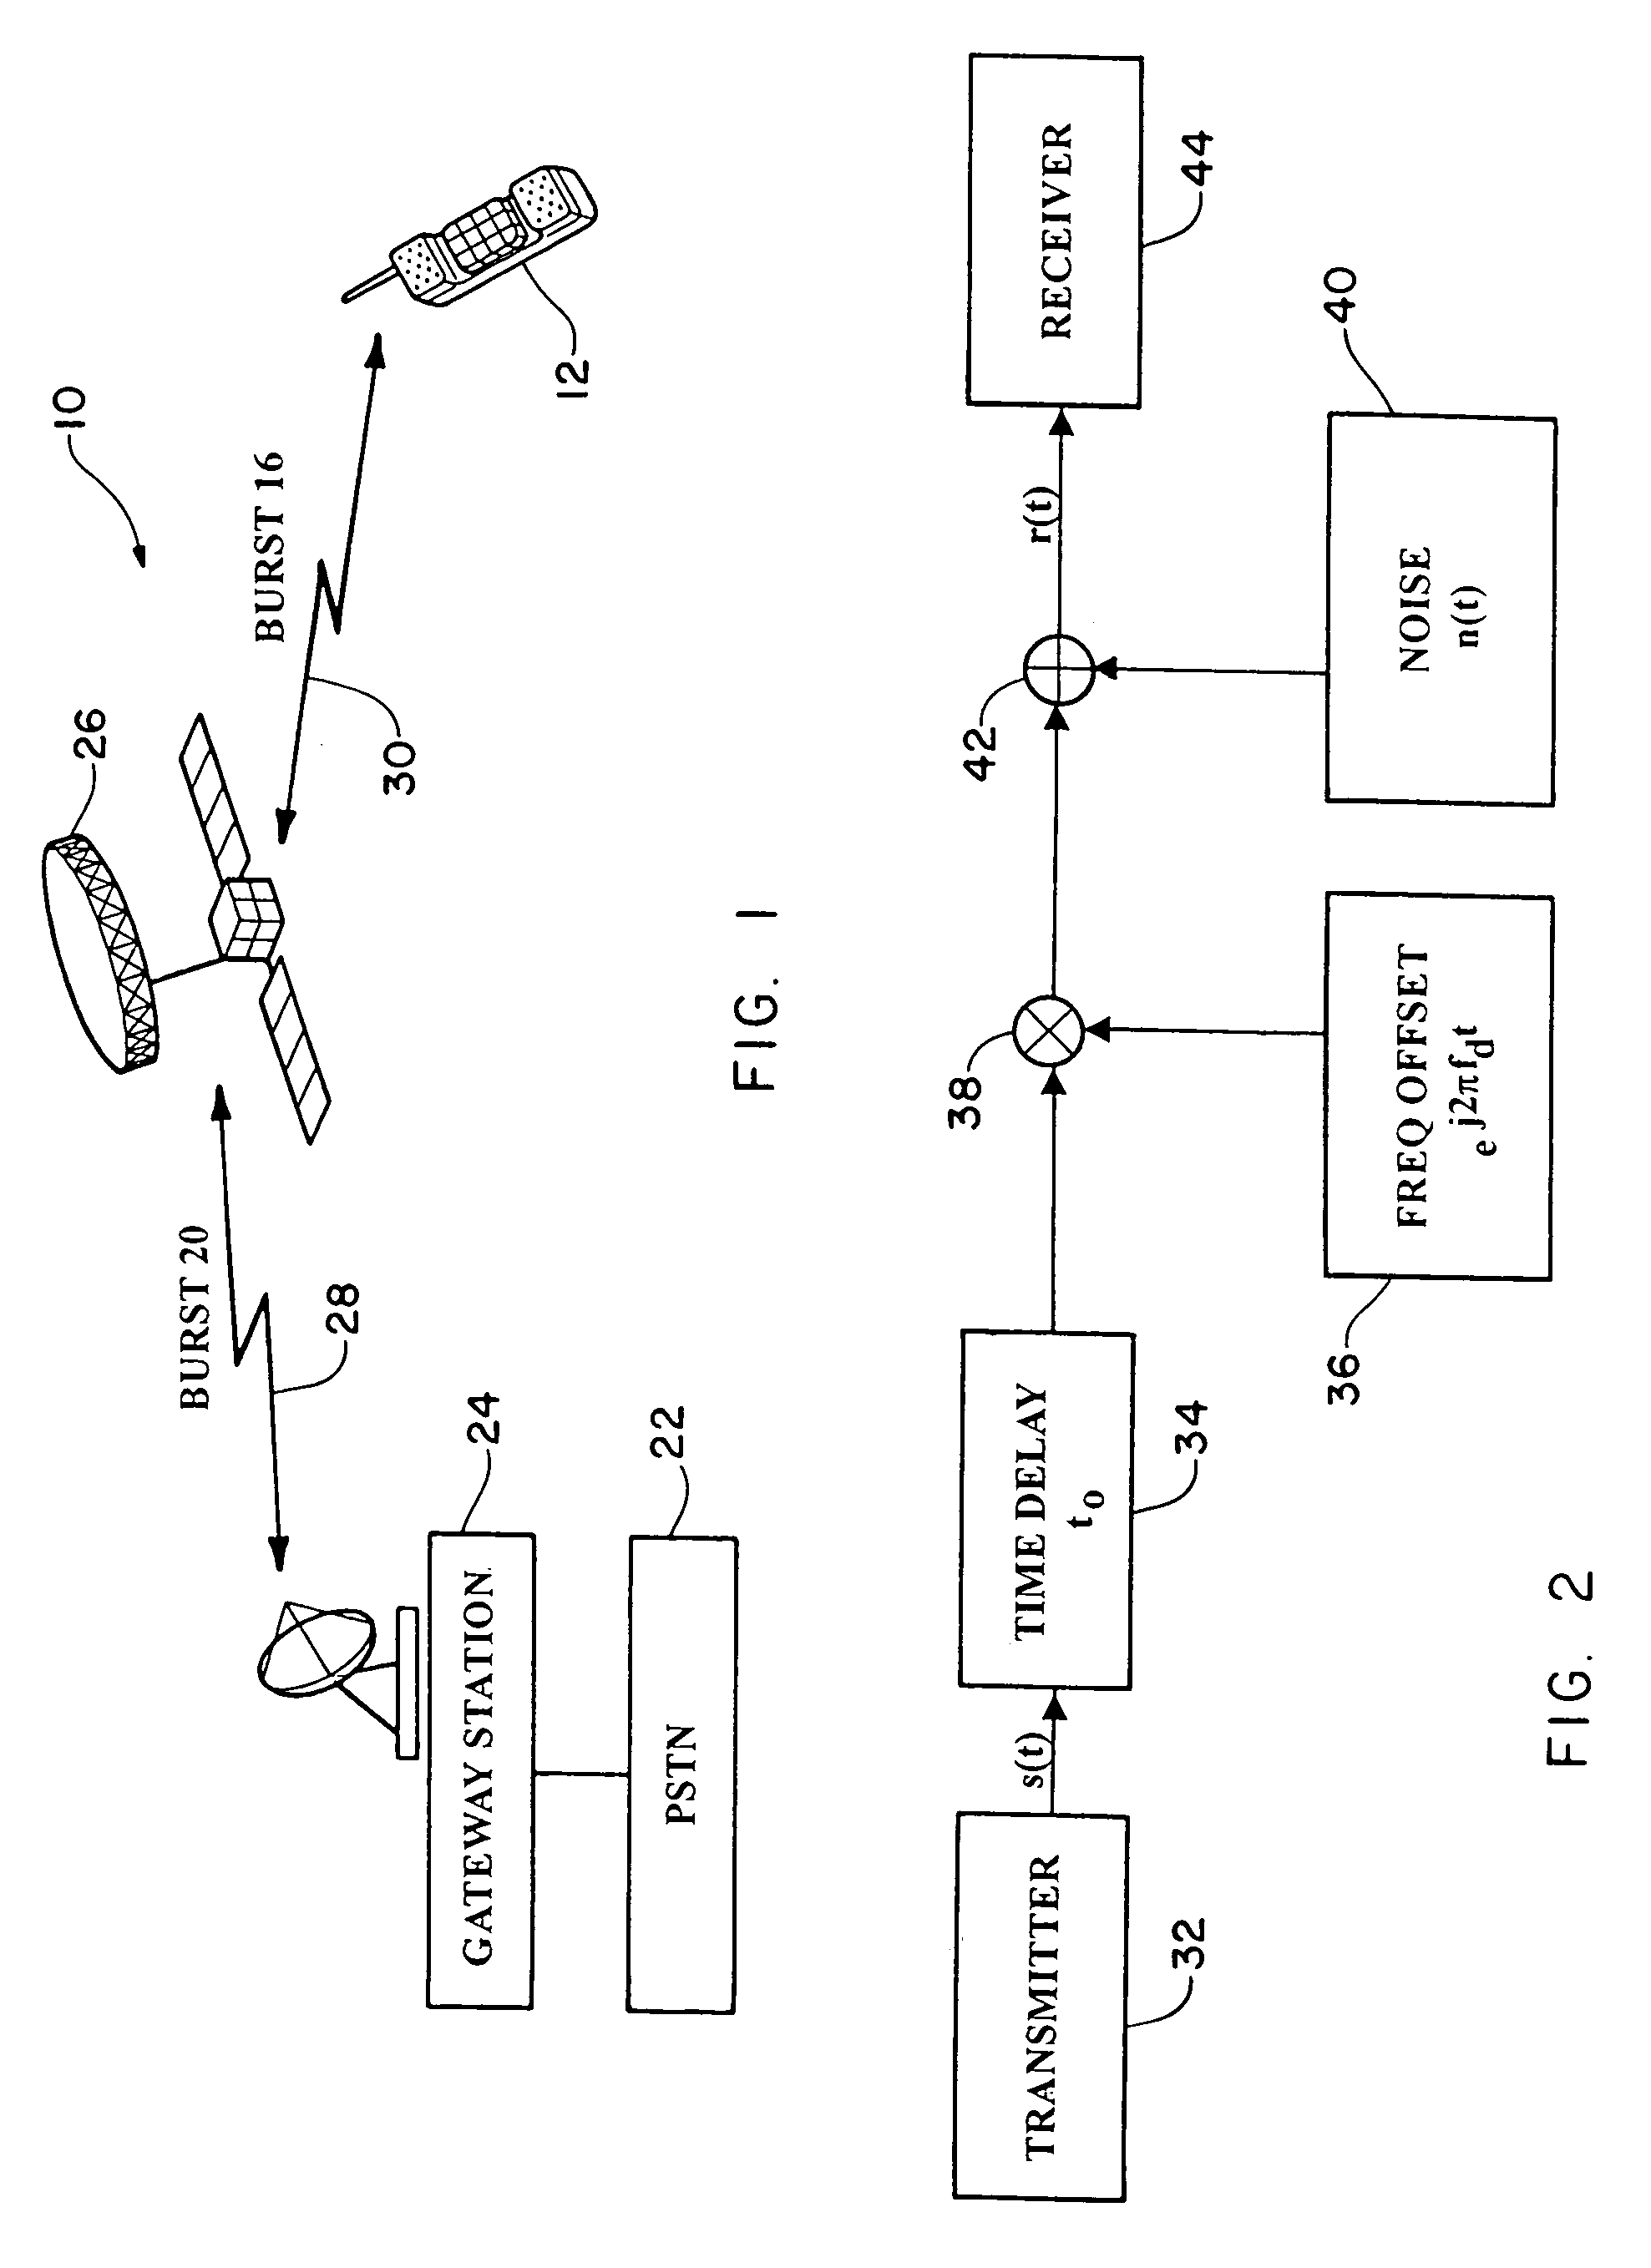 Acquisition mechanism for a mobile satellite system